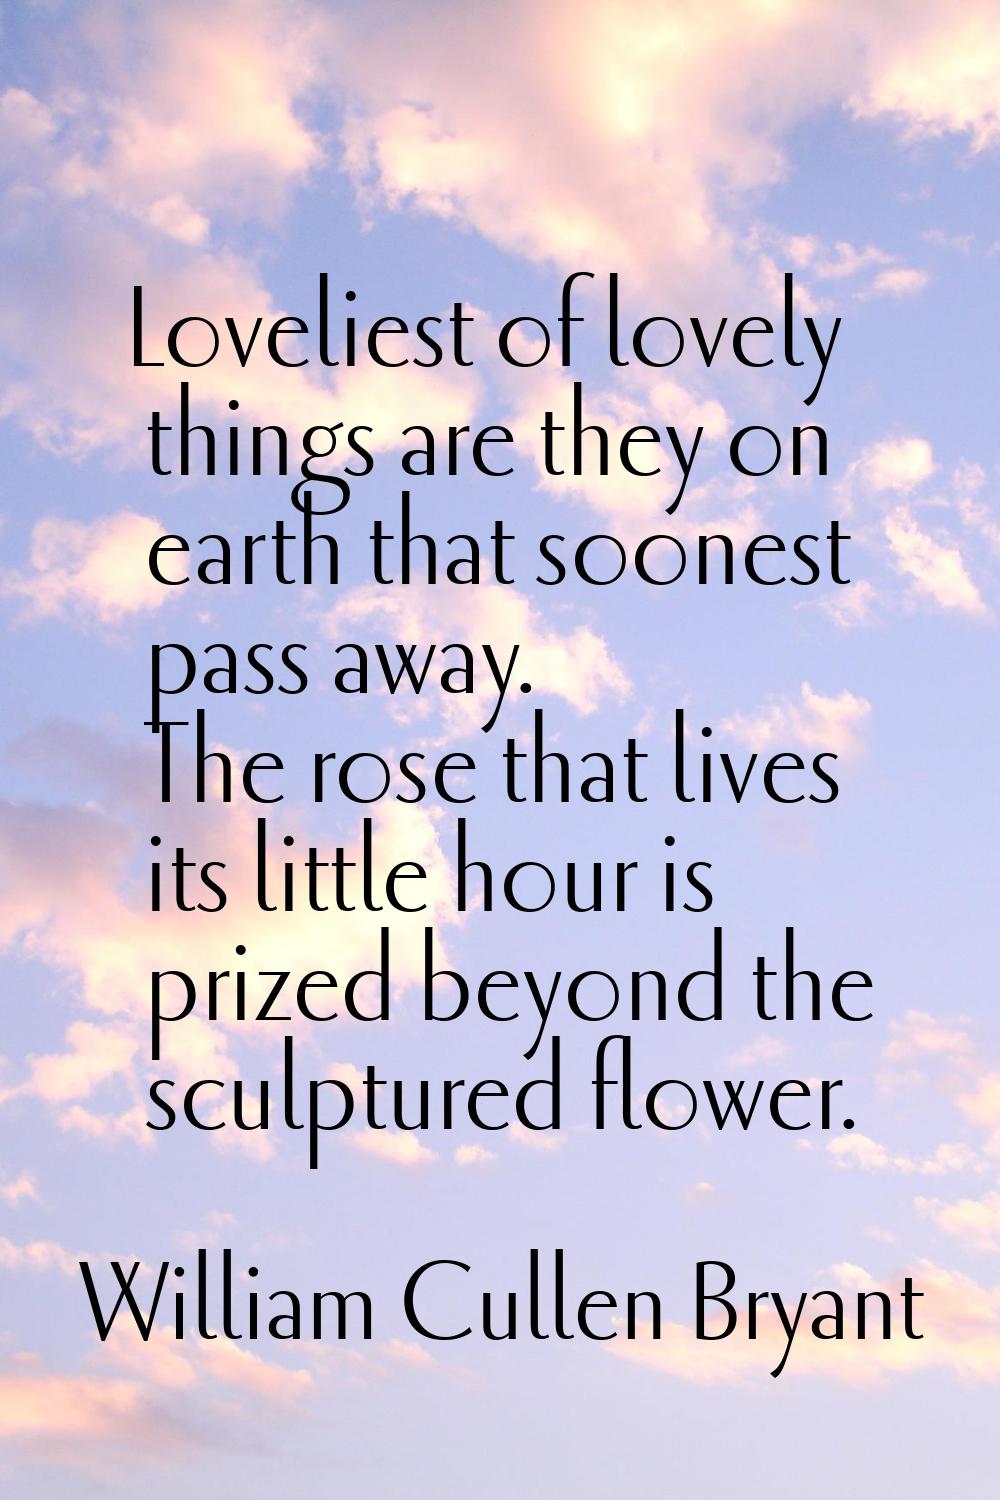 Loveliest of lovely things are they on earth that soonest pass away. The rose that lives its little